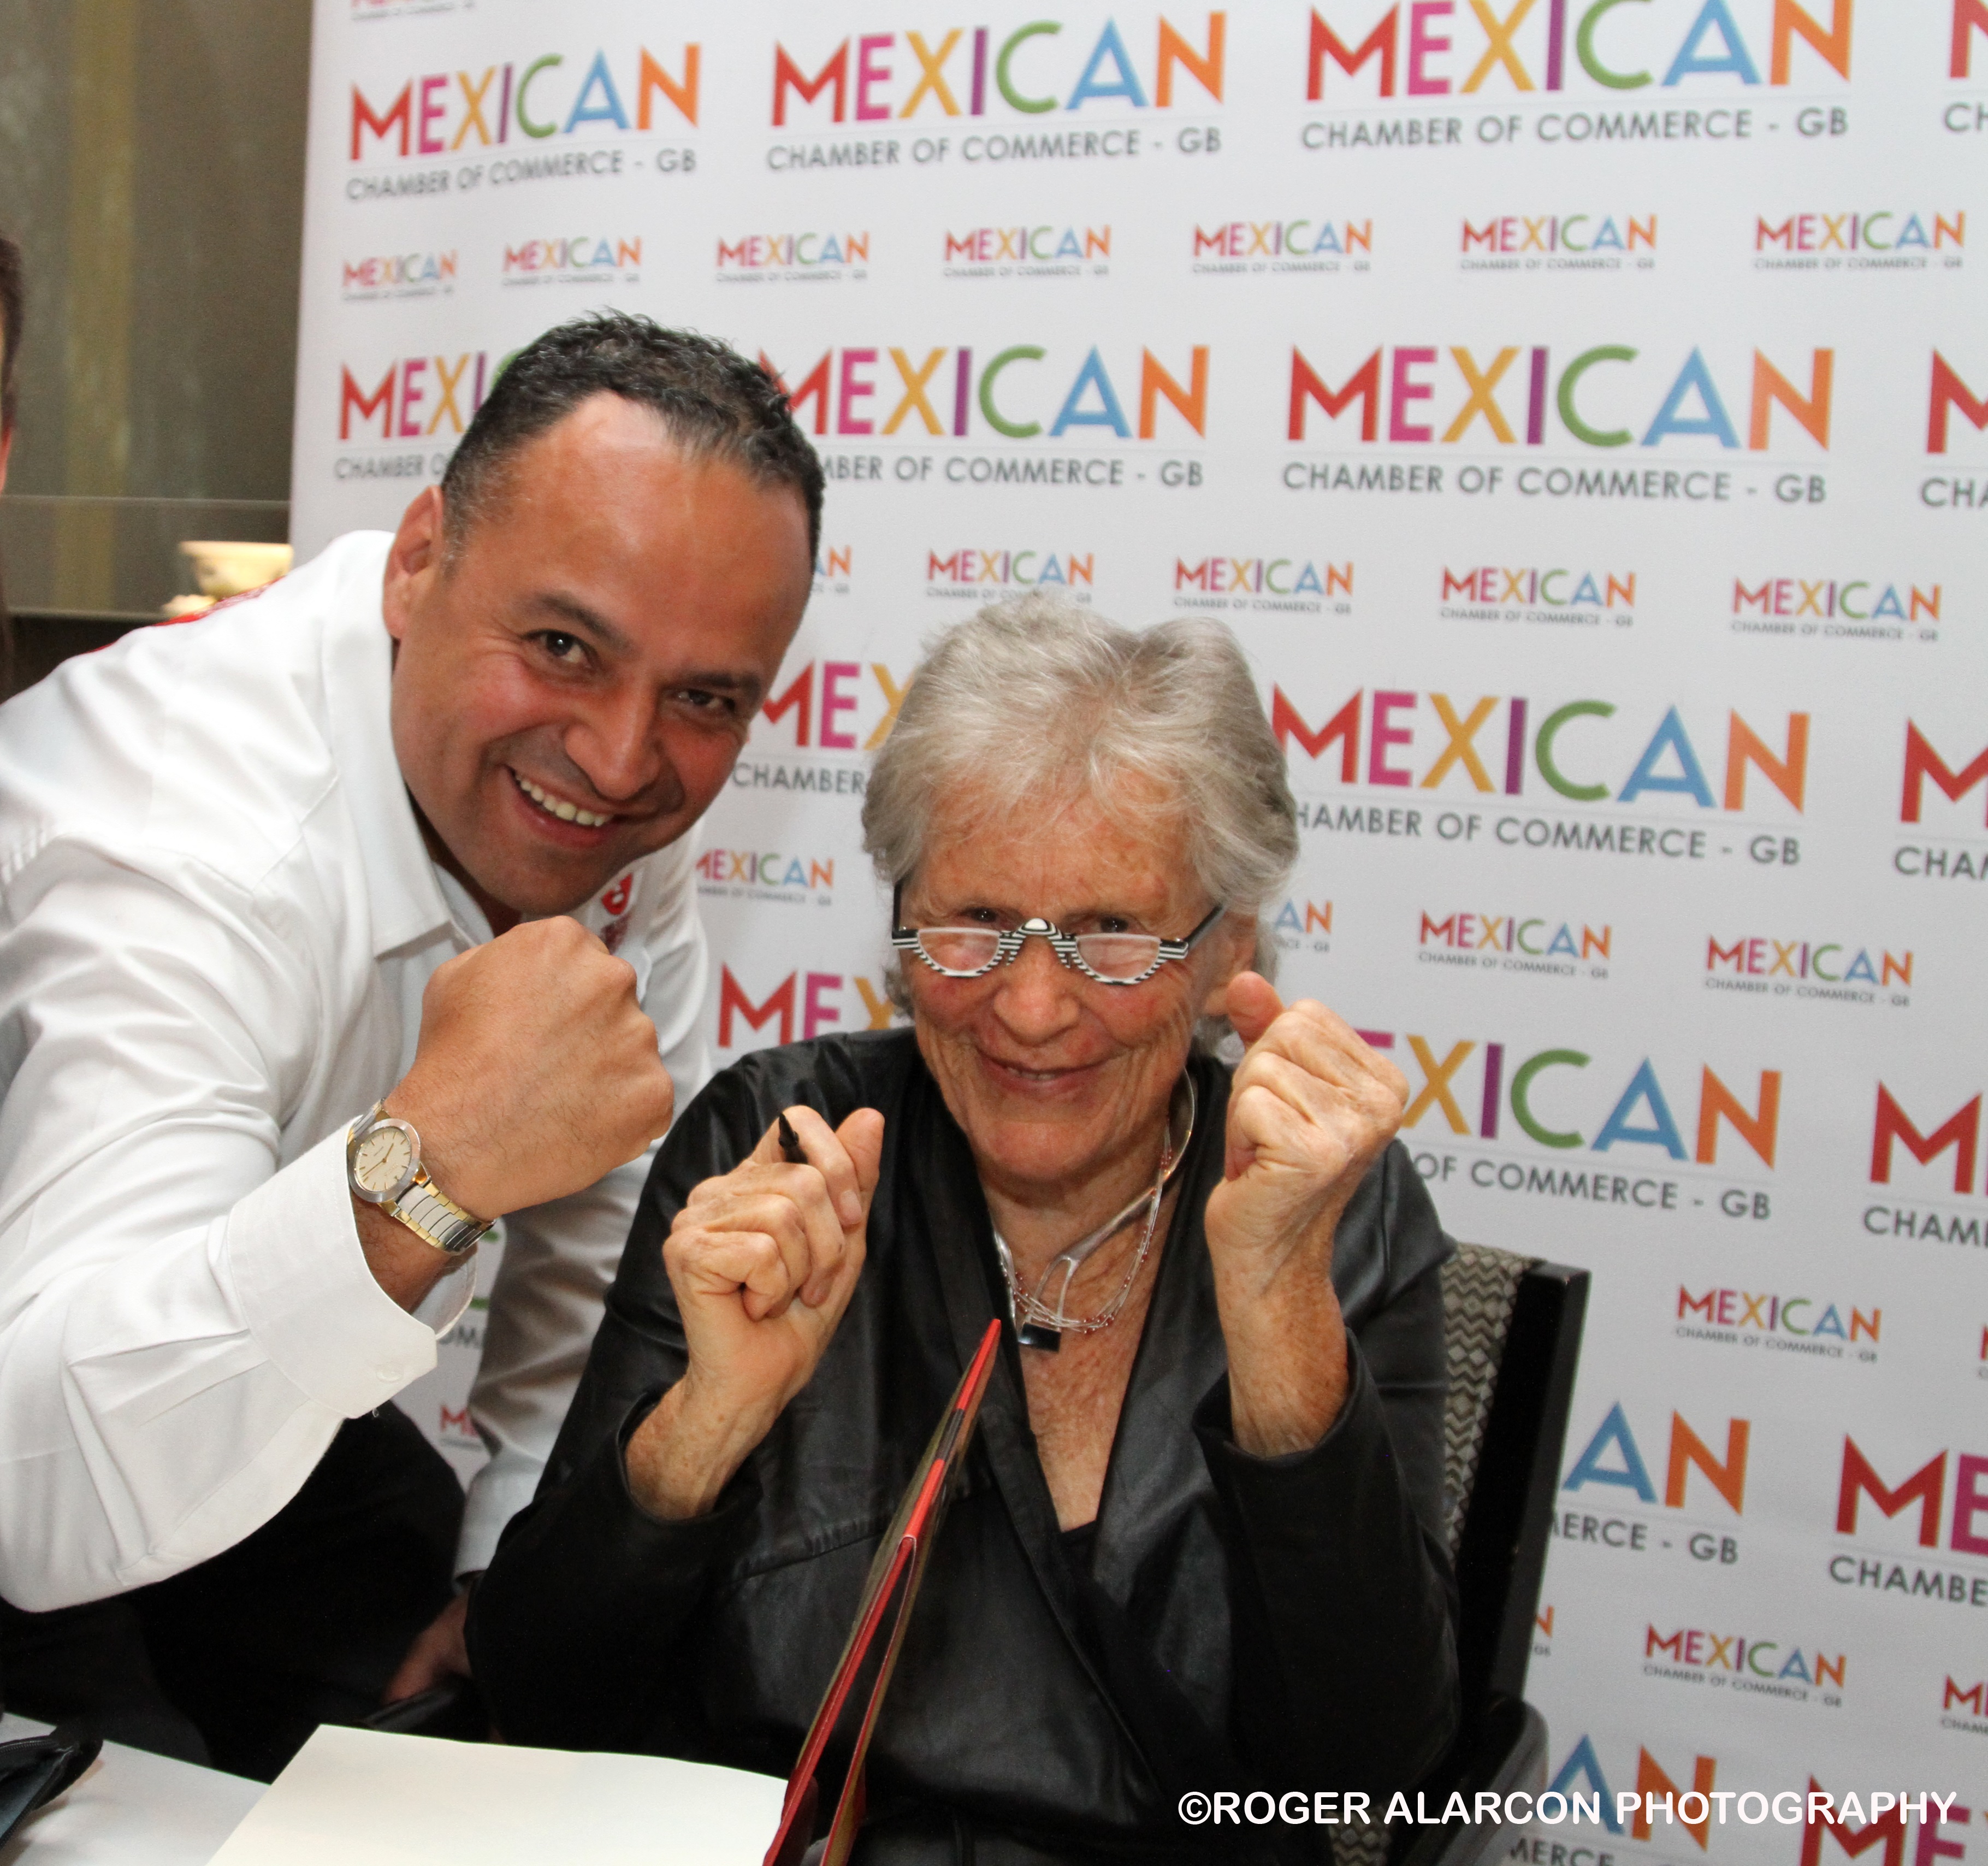 Meeting Diana Kennedy, “the Mick Jagger of Mexican food”